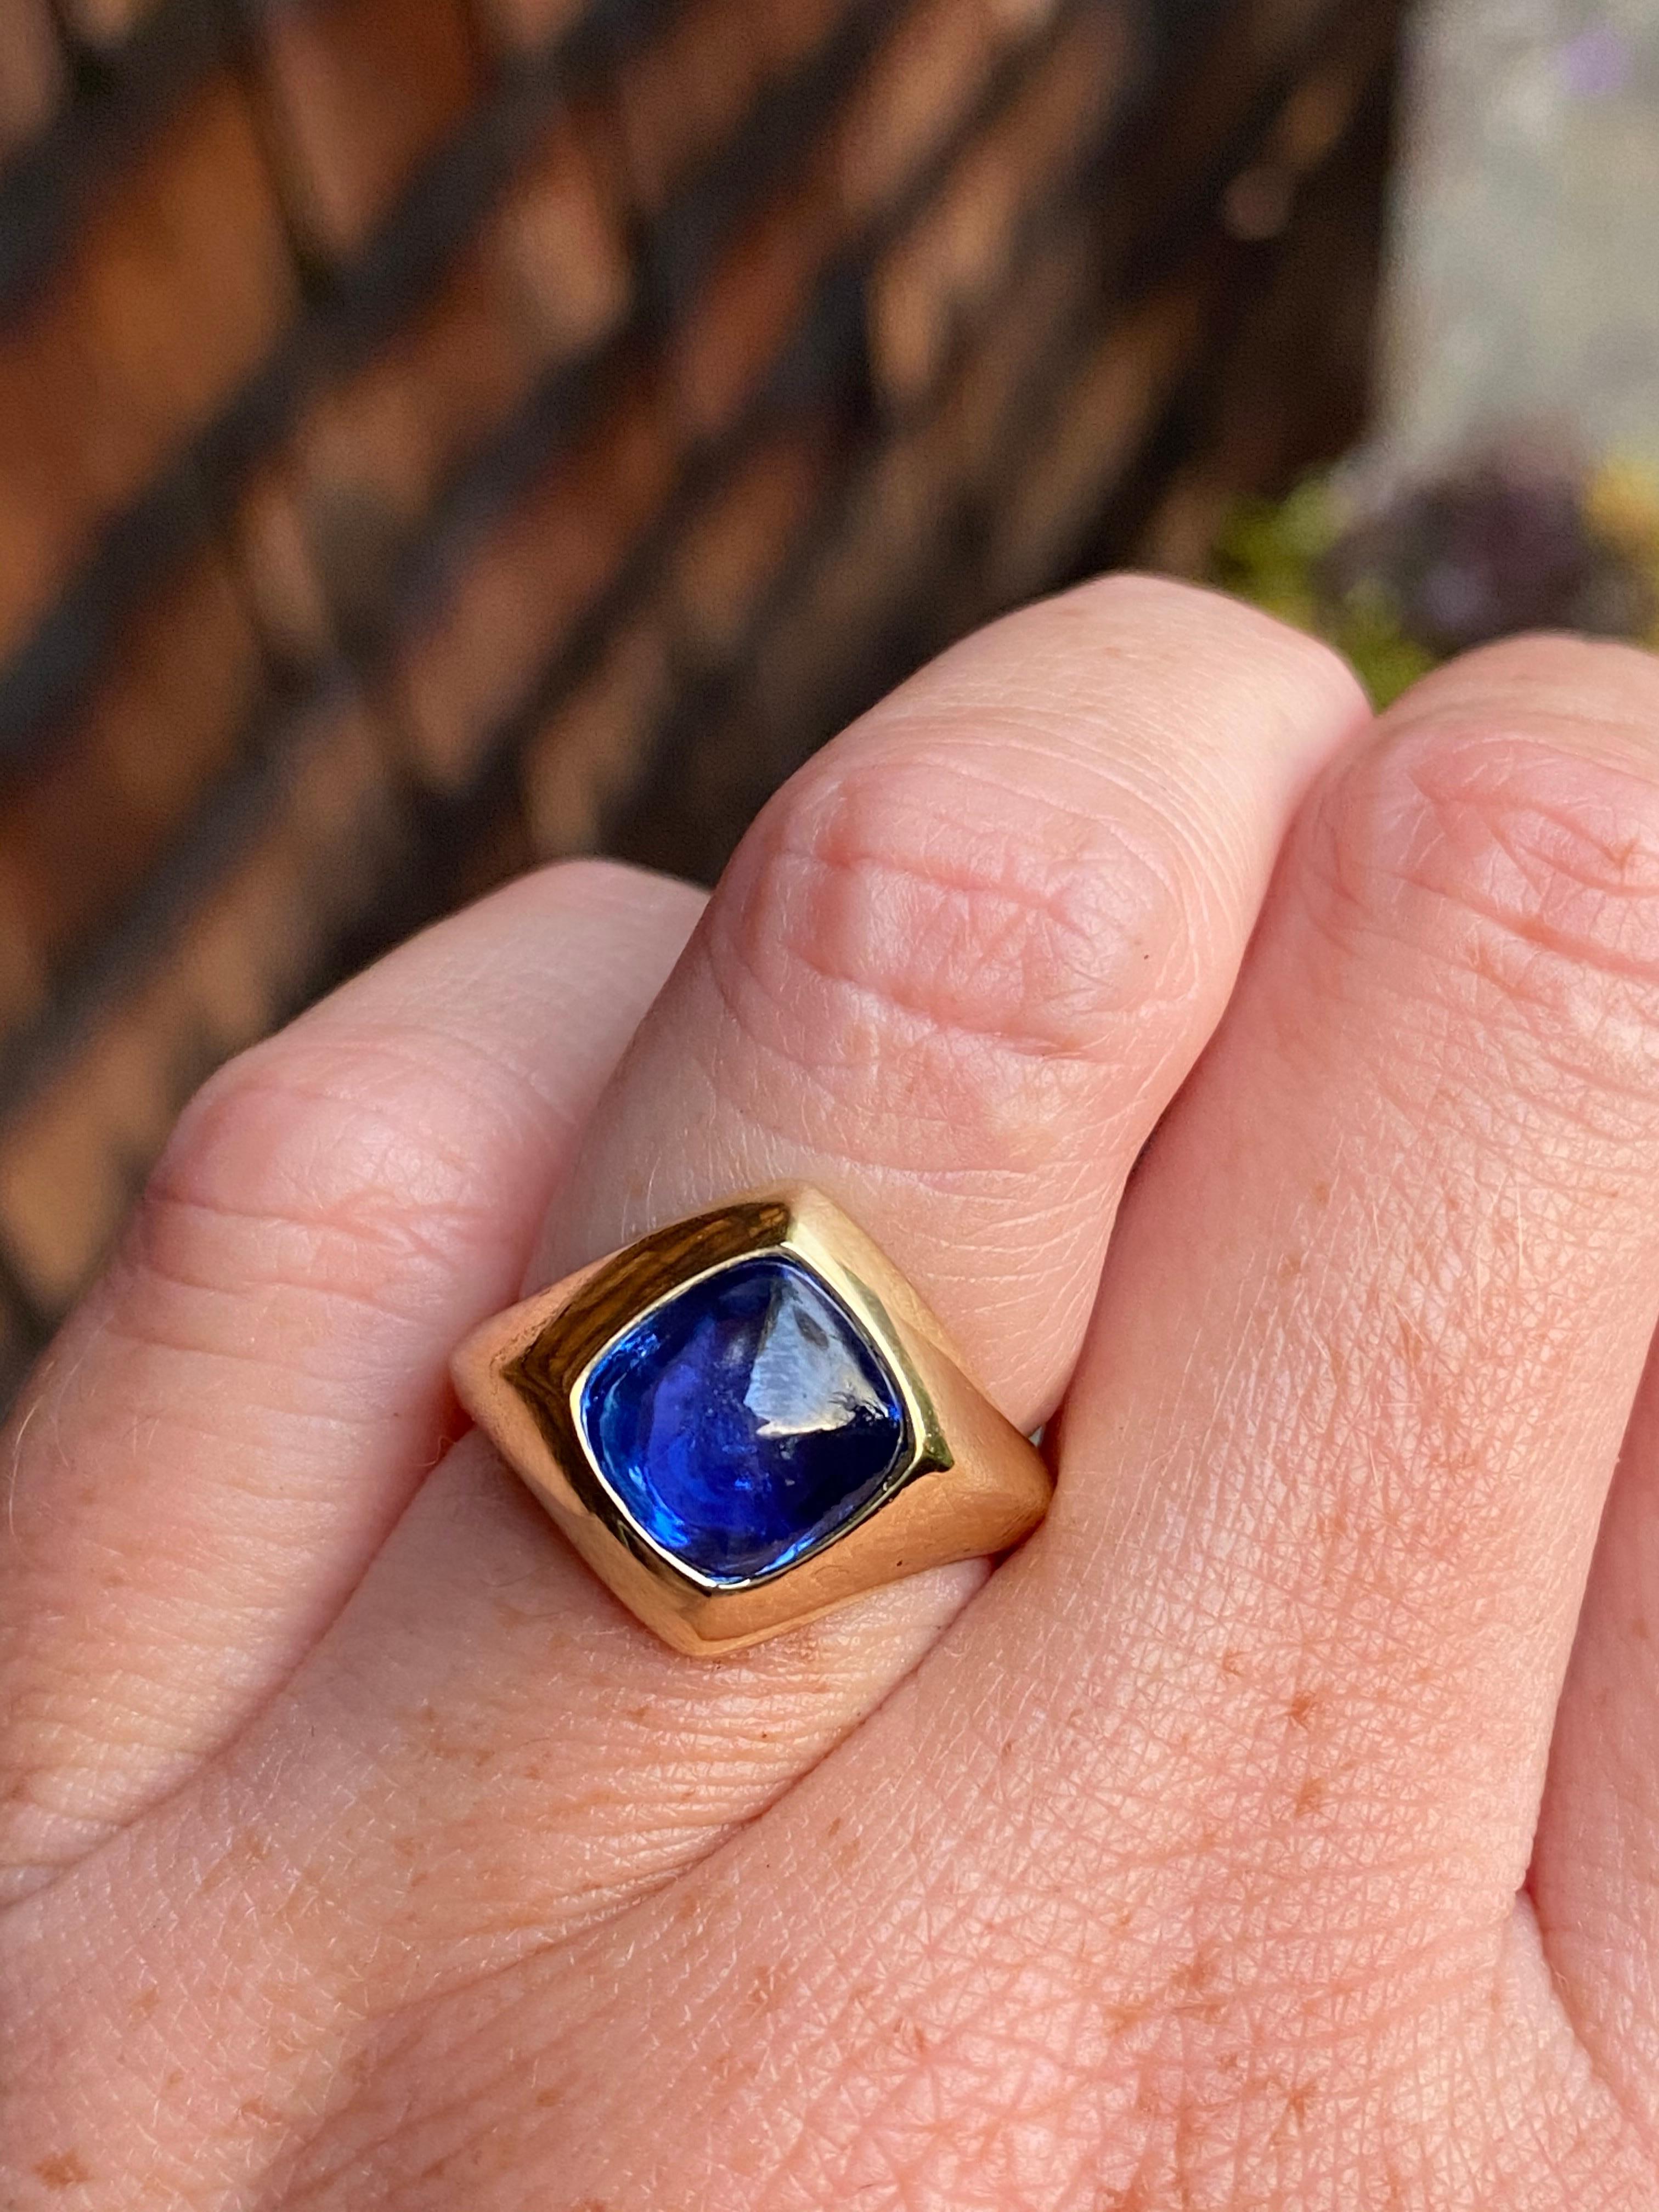 This ring features an extraordinary Ceylon sugar loaf cabochon sapphire in our hand carved wax/cast signet setting of 18 karat recycled gold. His or hers.
-4.16 carat certified natural no heat Ceylon sugarloaf sapphire emerald; luminous and full of